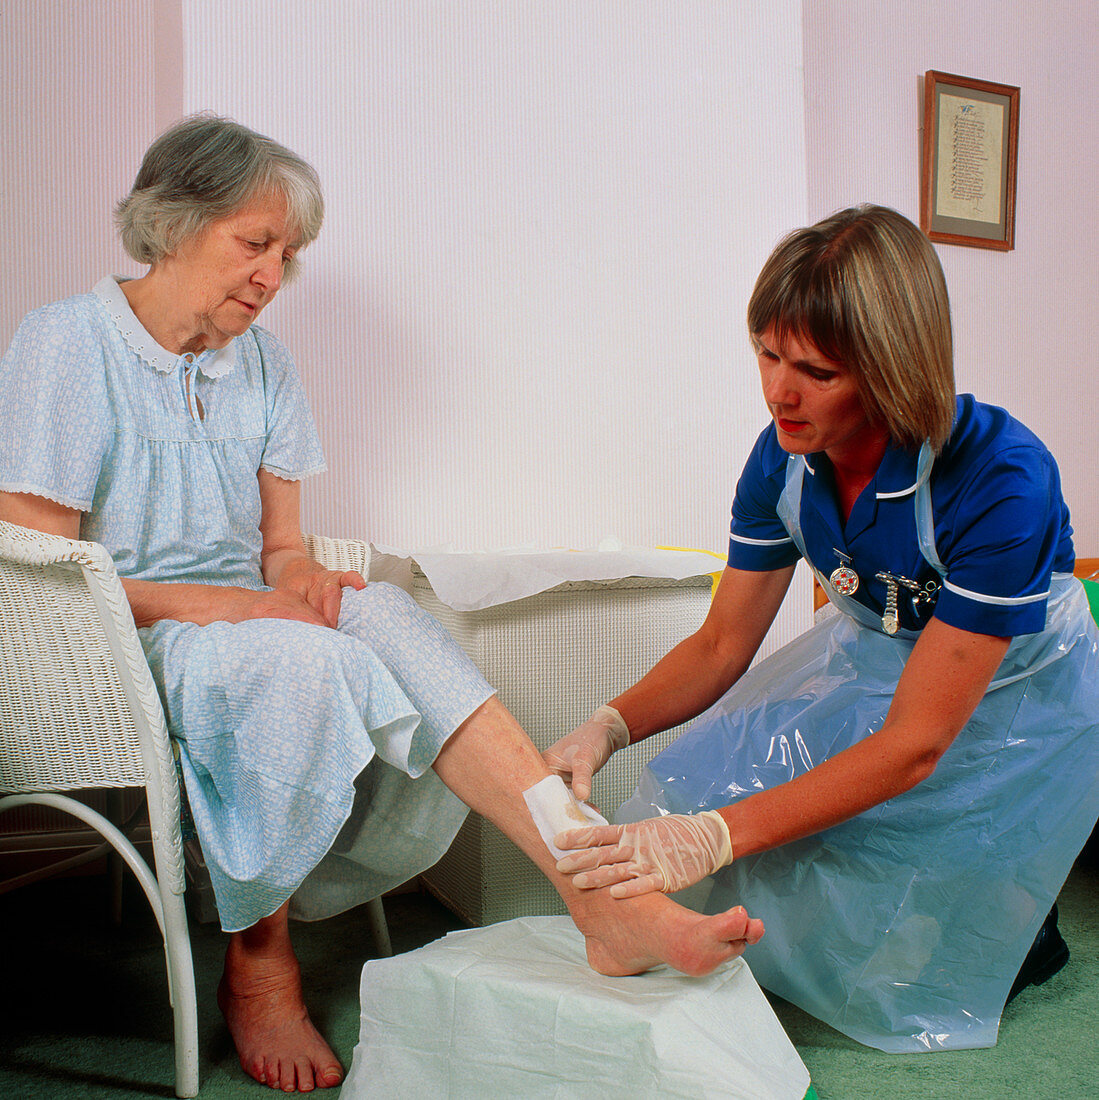 District nurse bandages leg ulcer on old woman